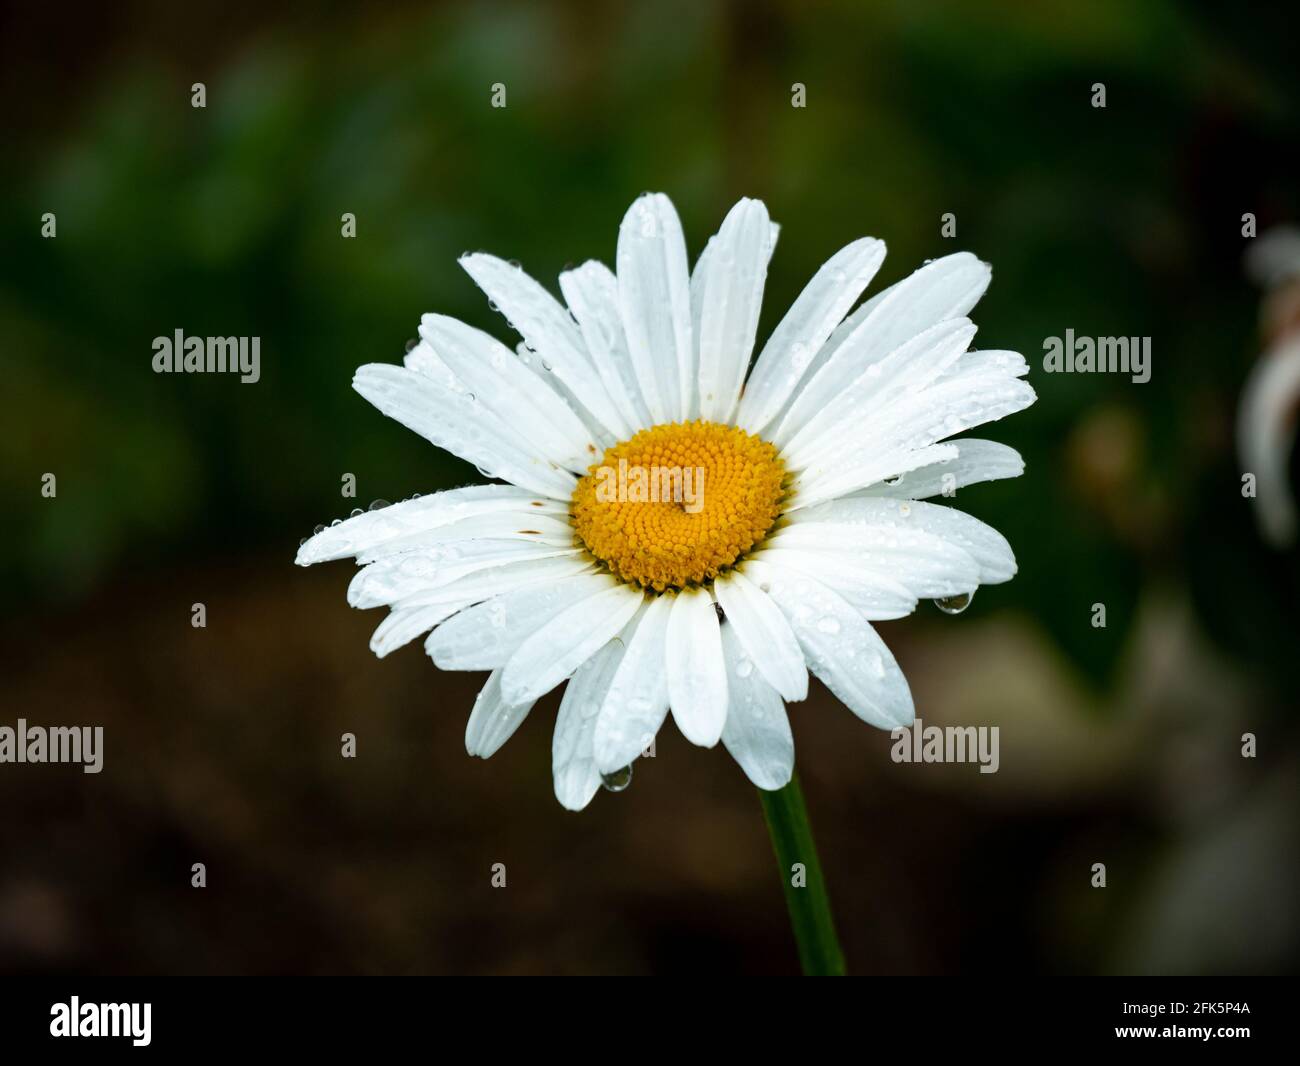 Oxeye Daisy, Dog Daisy or Marguerite (Leucanthemum vulgare) is the Beautiful and Simple Flower with White Petals and Yellow Center in the Middle of a Stock Photo